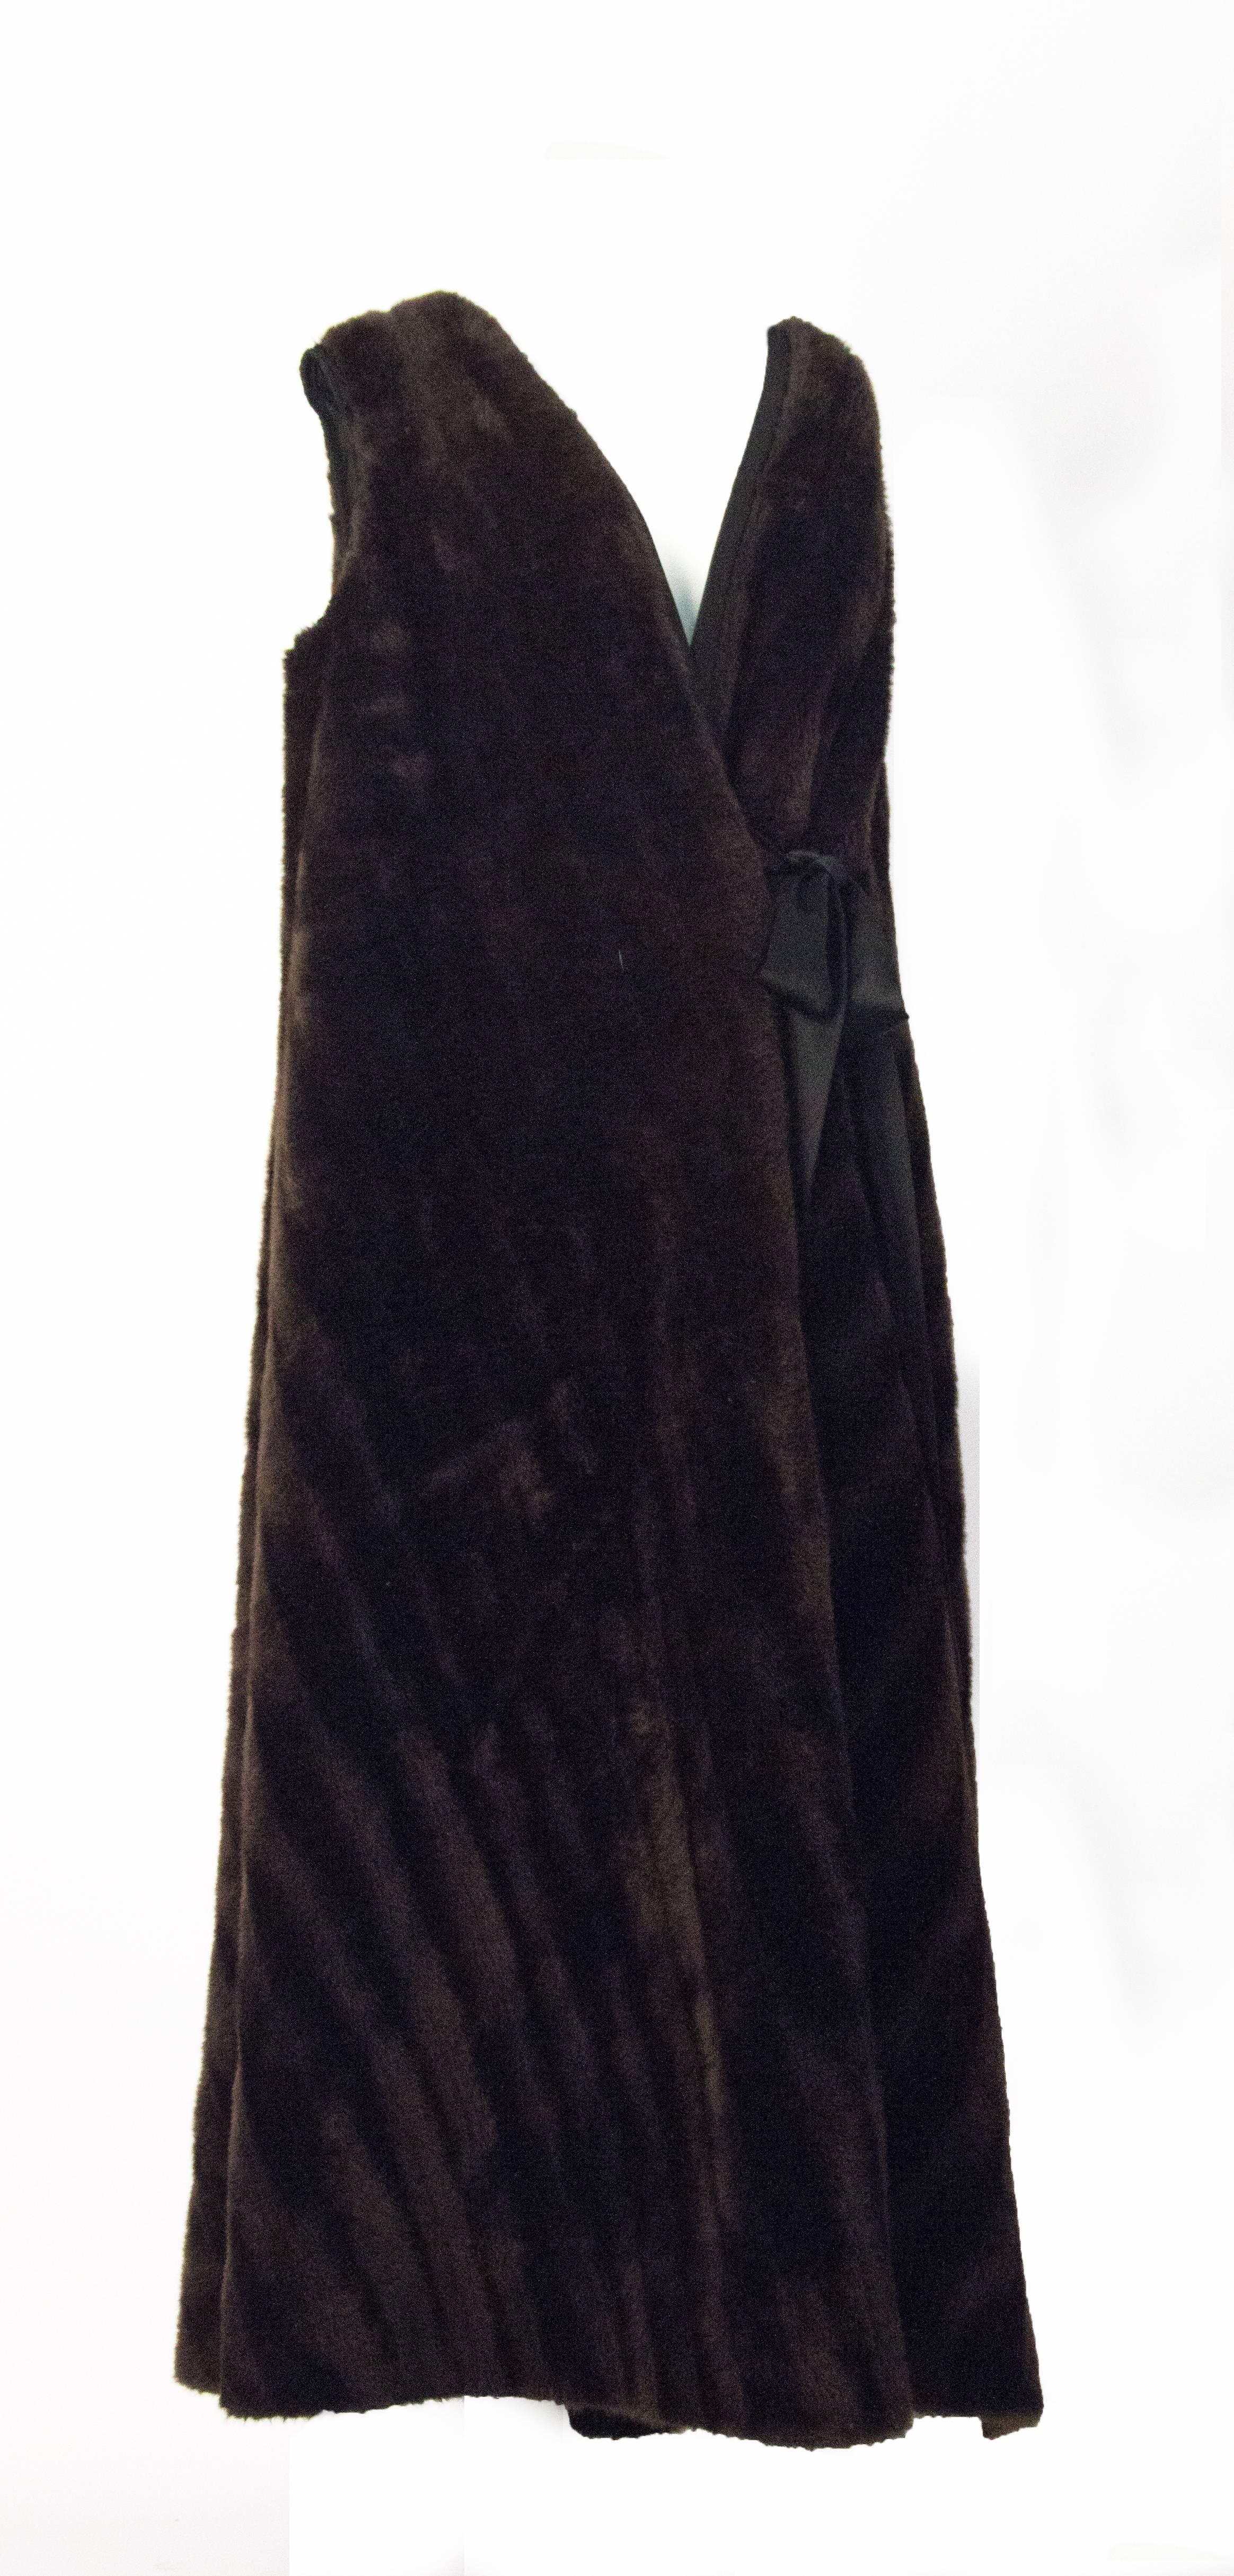 70s dark brown faux fur vest. Wraps around and ties in the front with attached satin sashes. Fully lined. 

